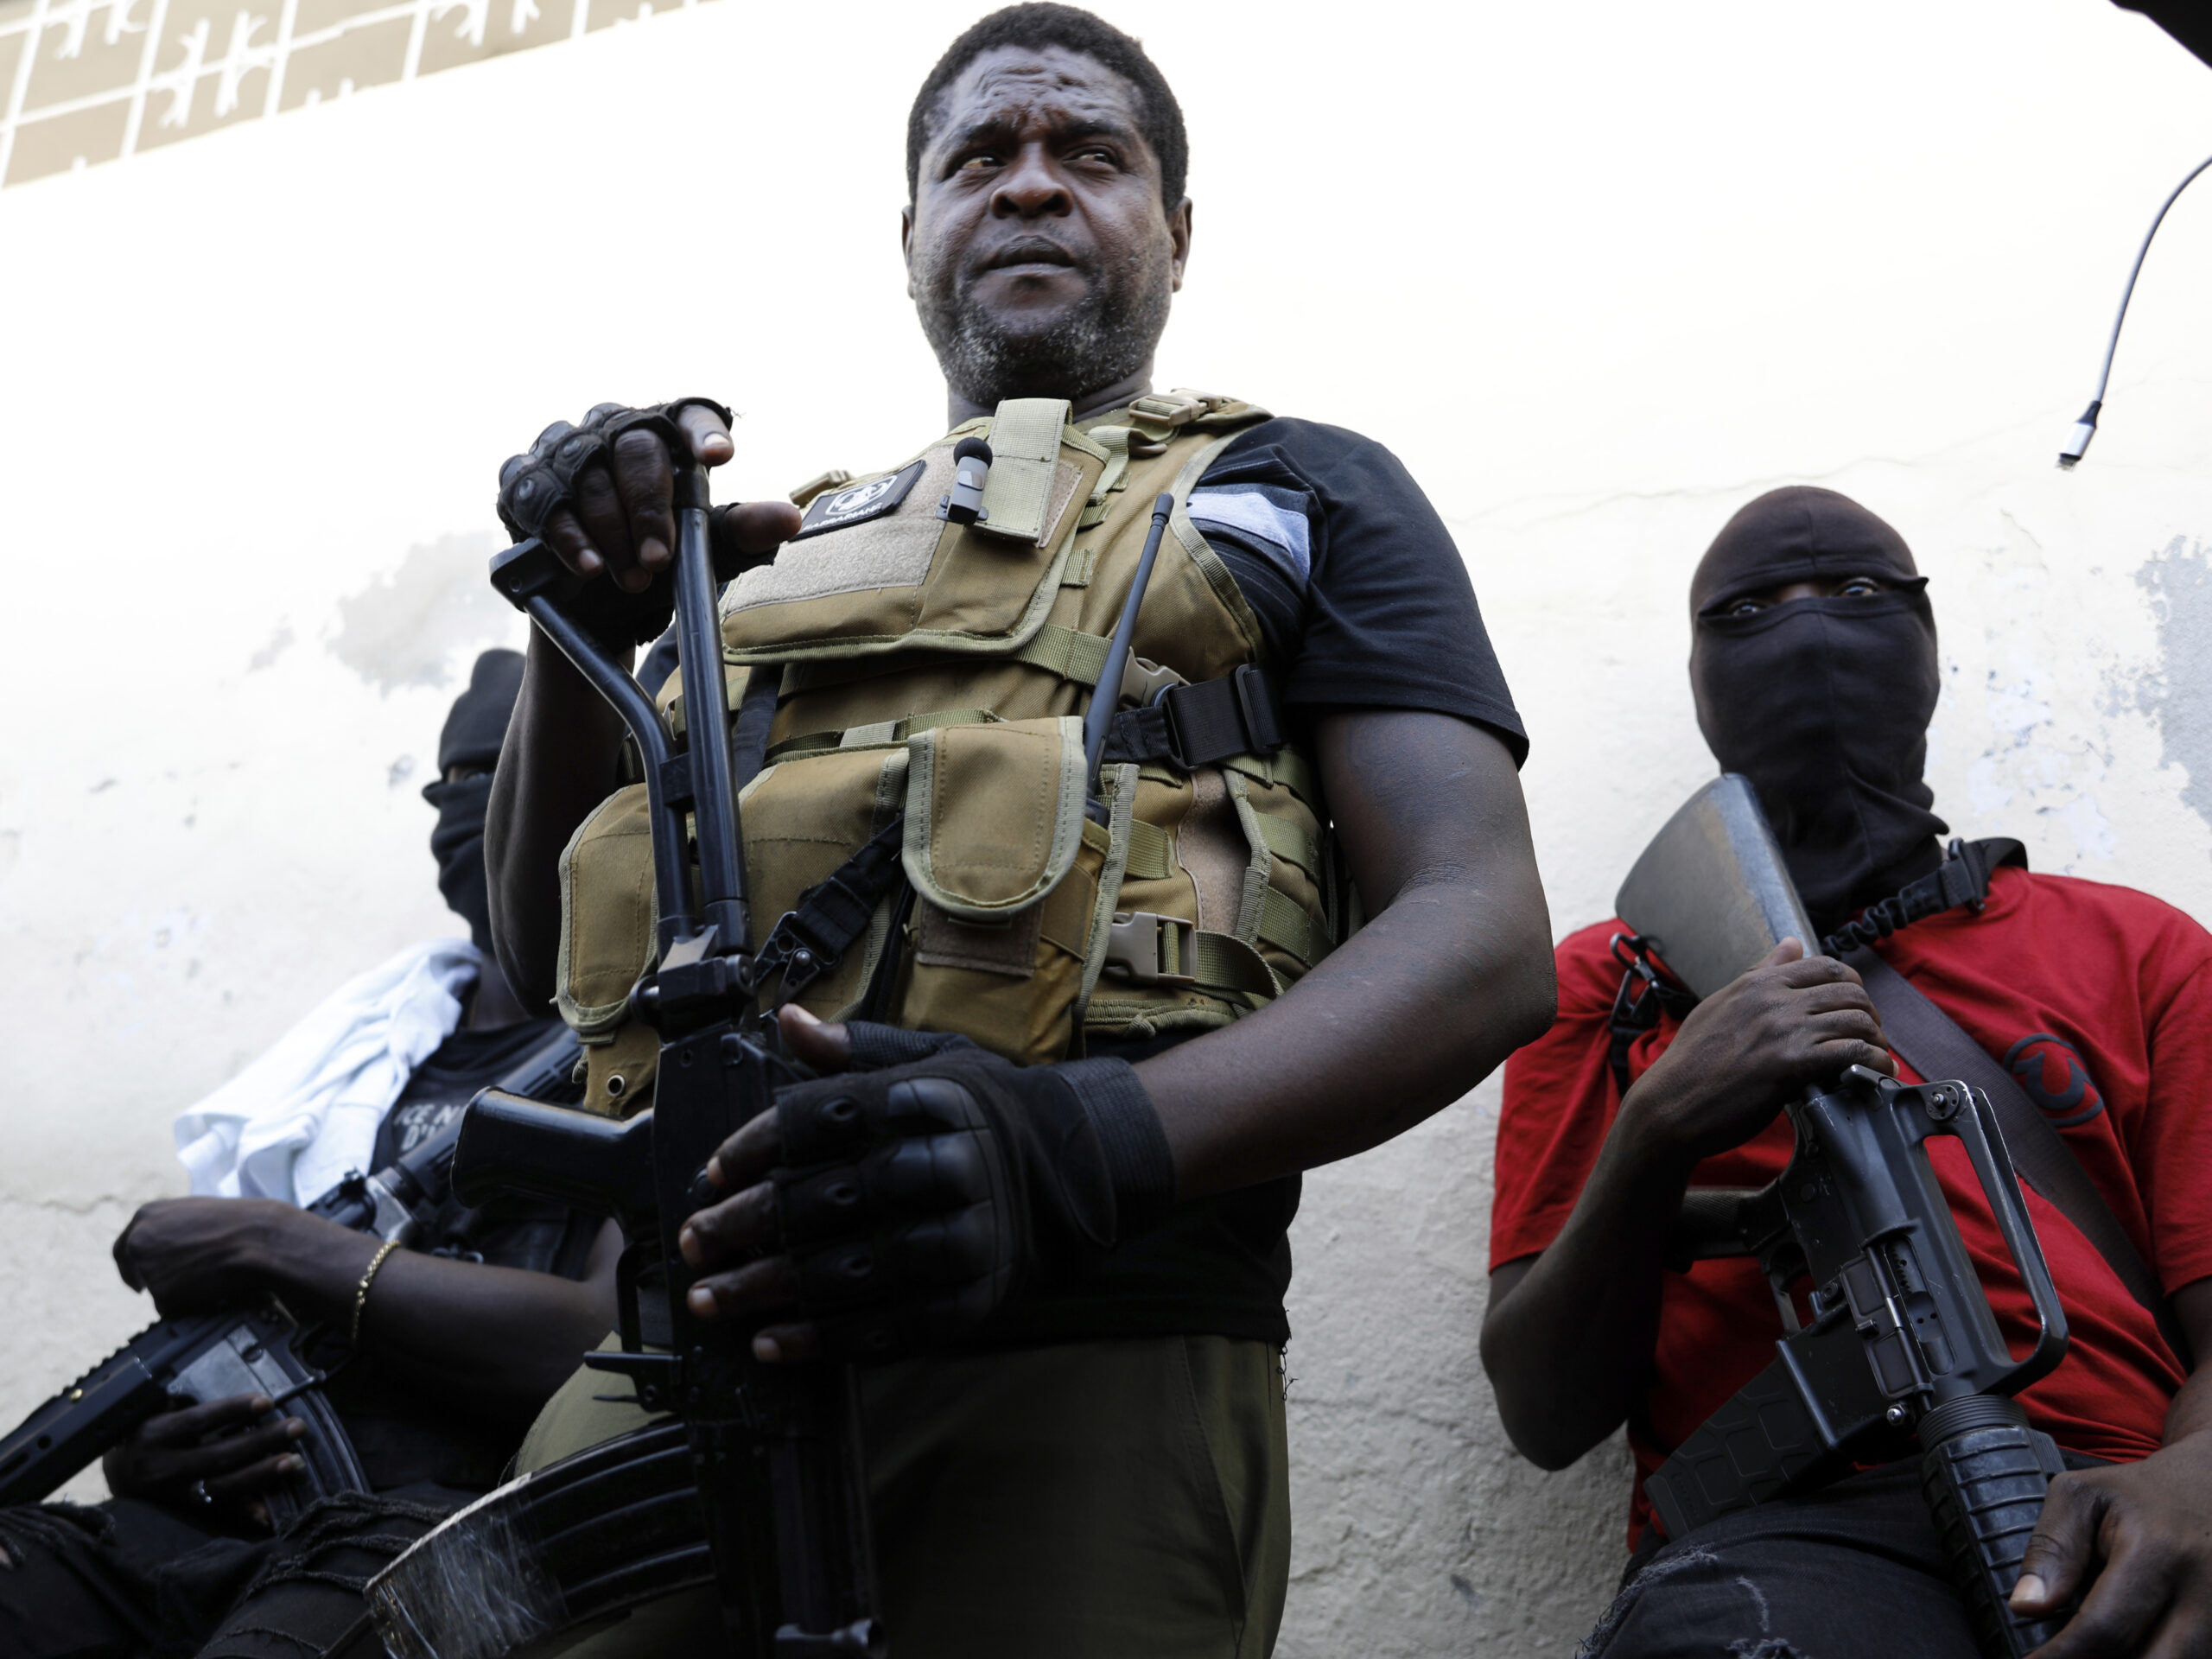 Haiti’s notorious gang leader, Barbecue, says his forces are ready for a long fight